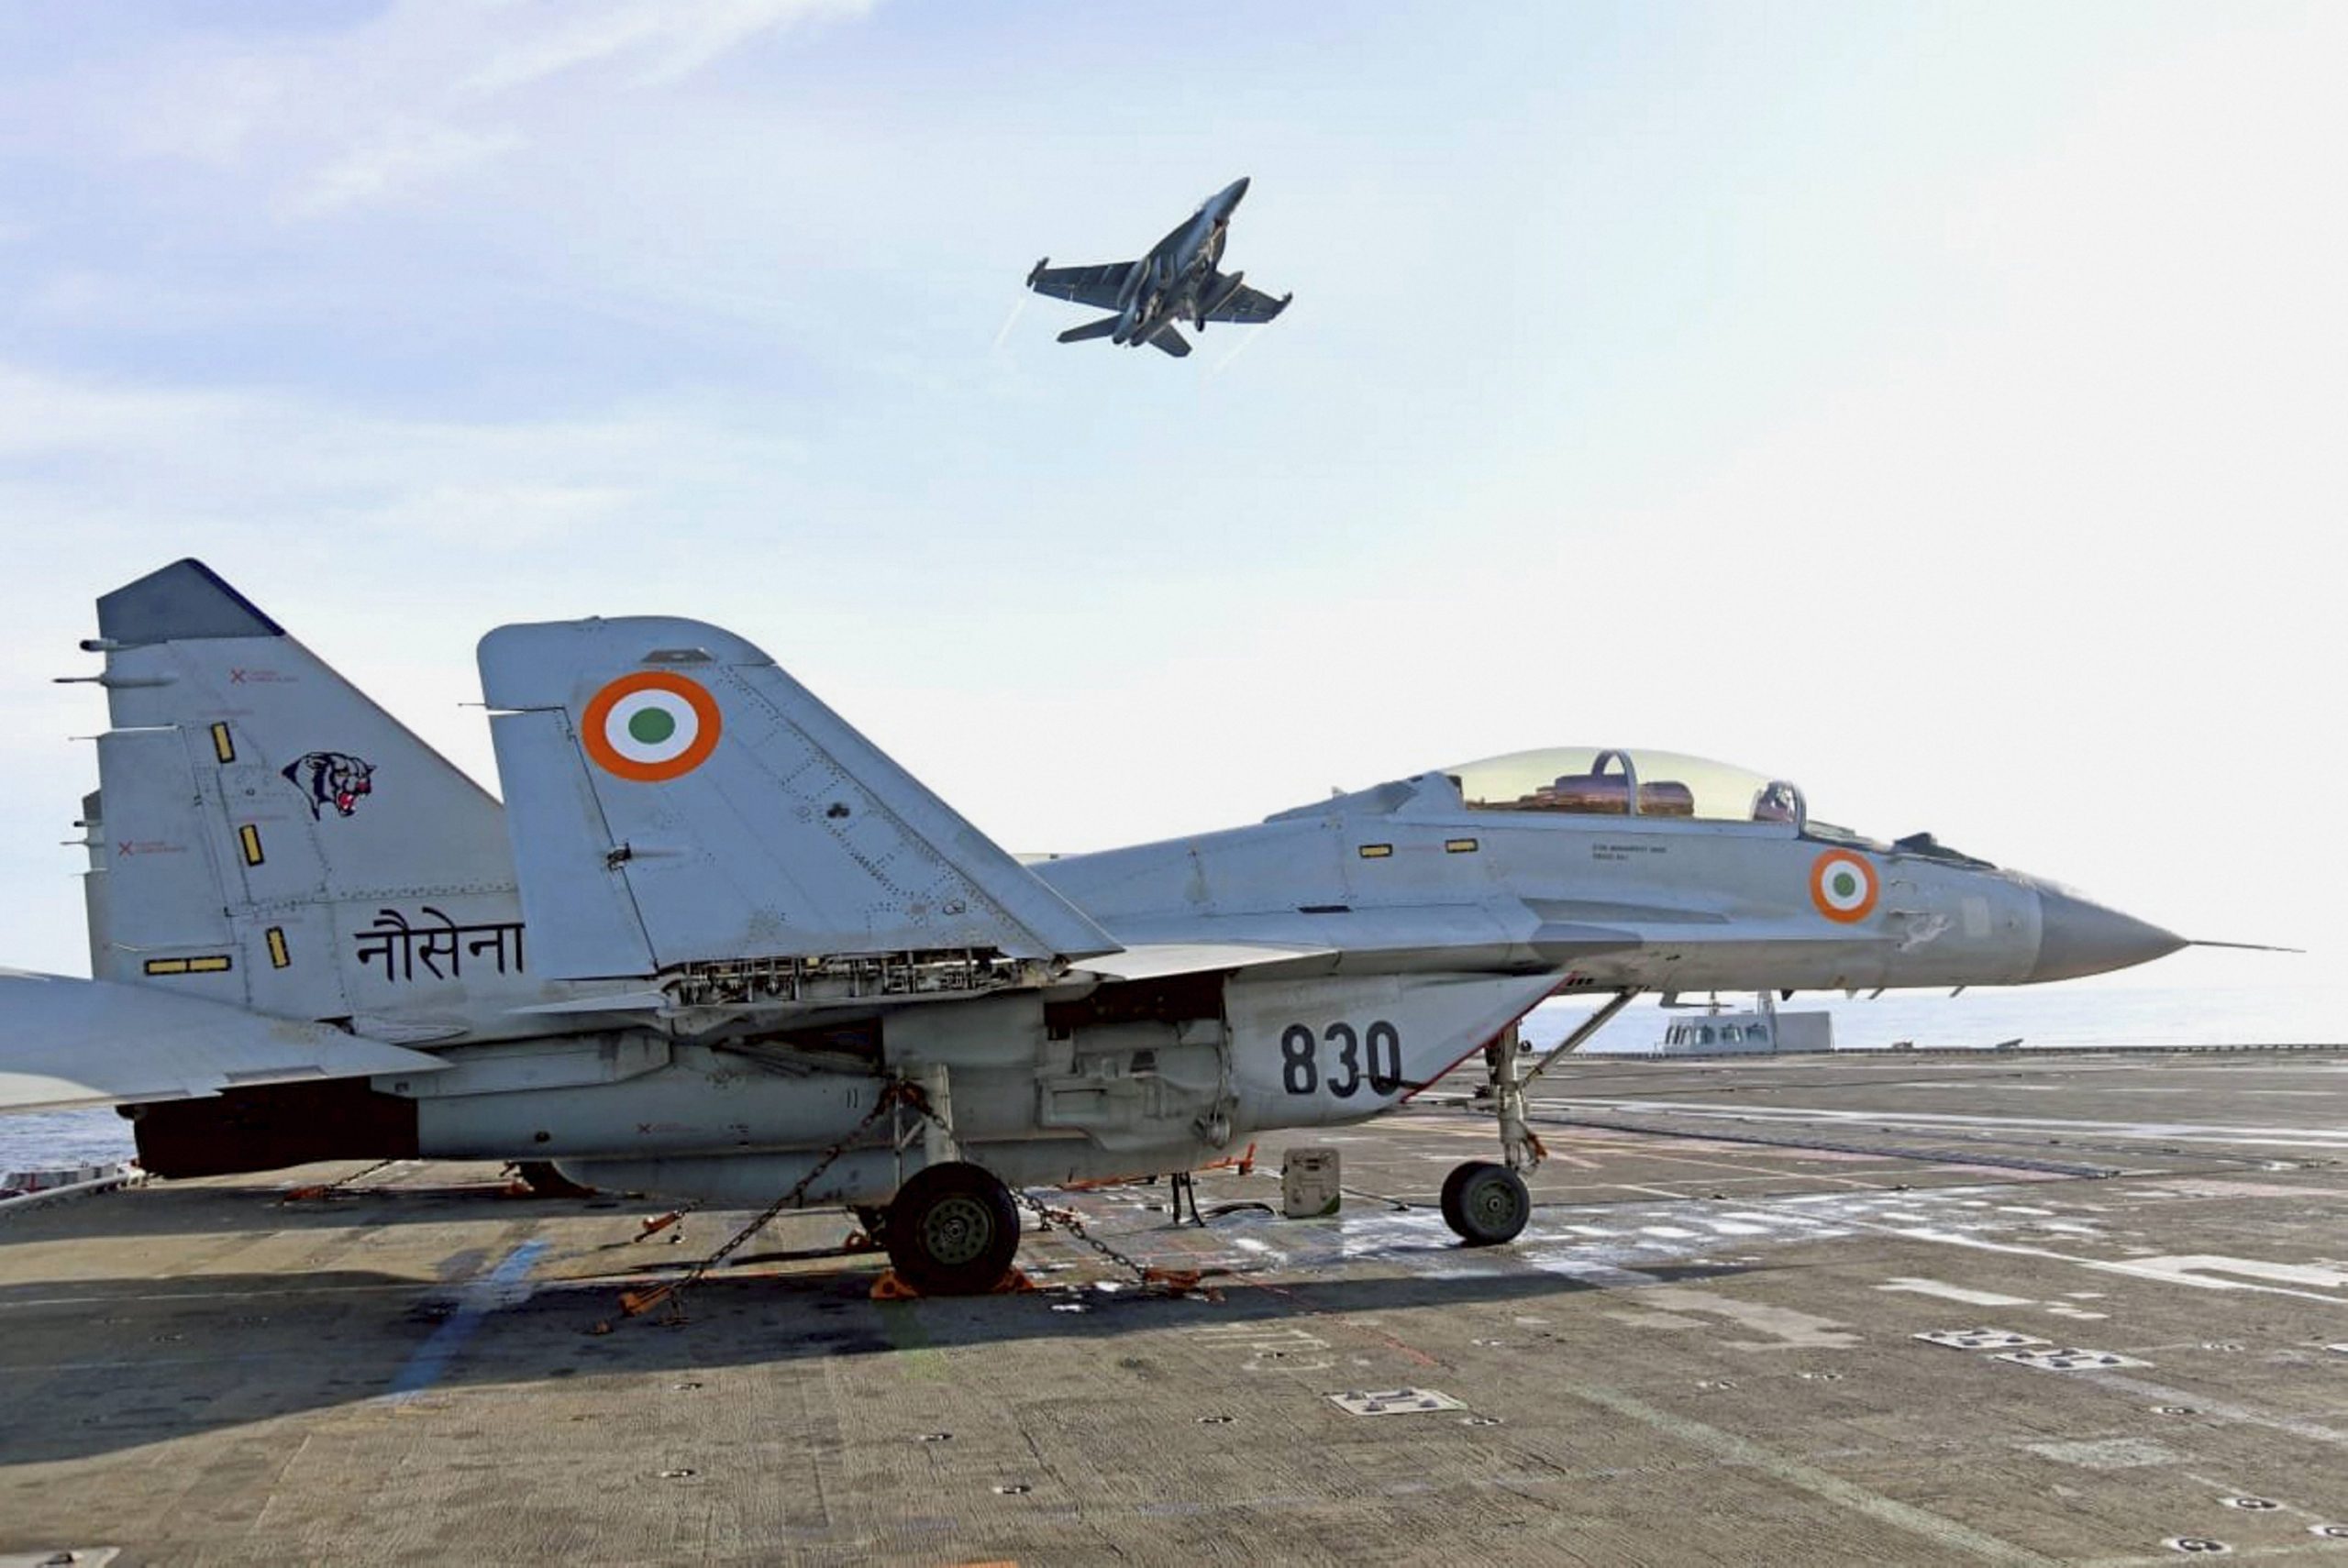 MiG-29 trainer aircraft crashes at sea, one pilot rescued